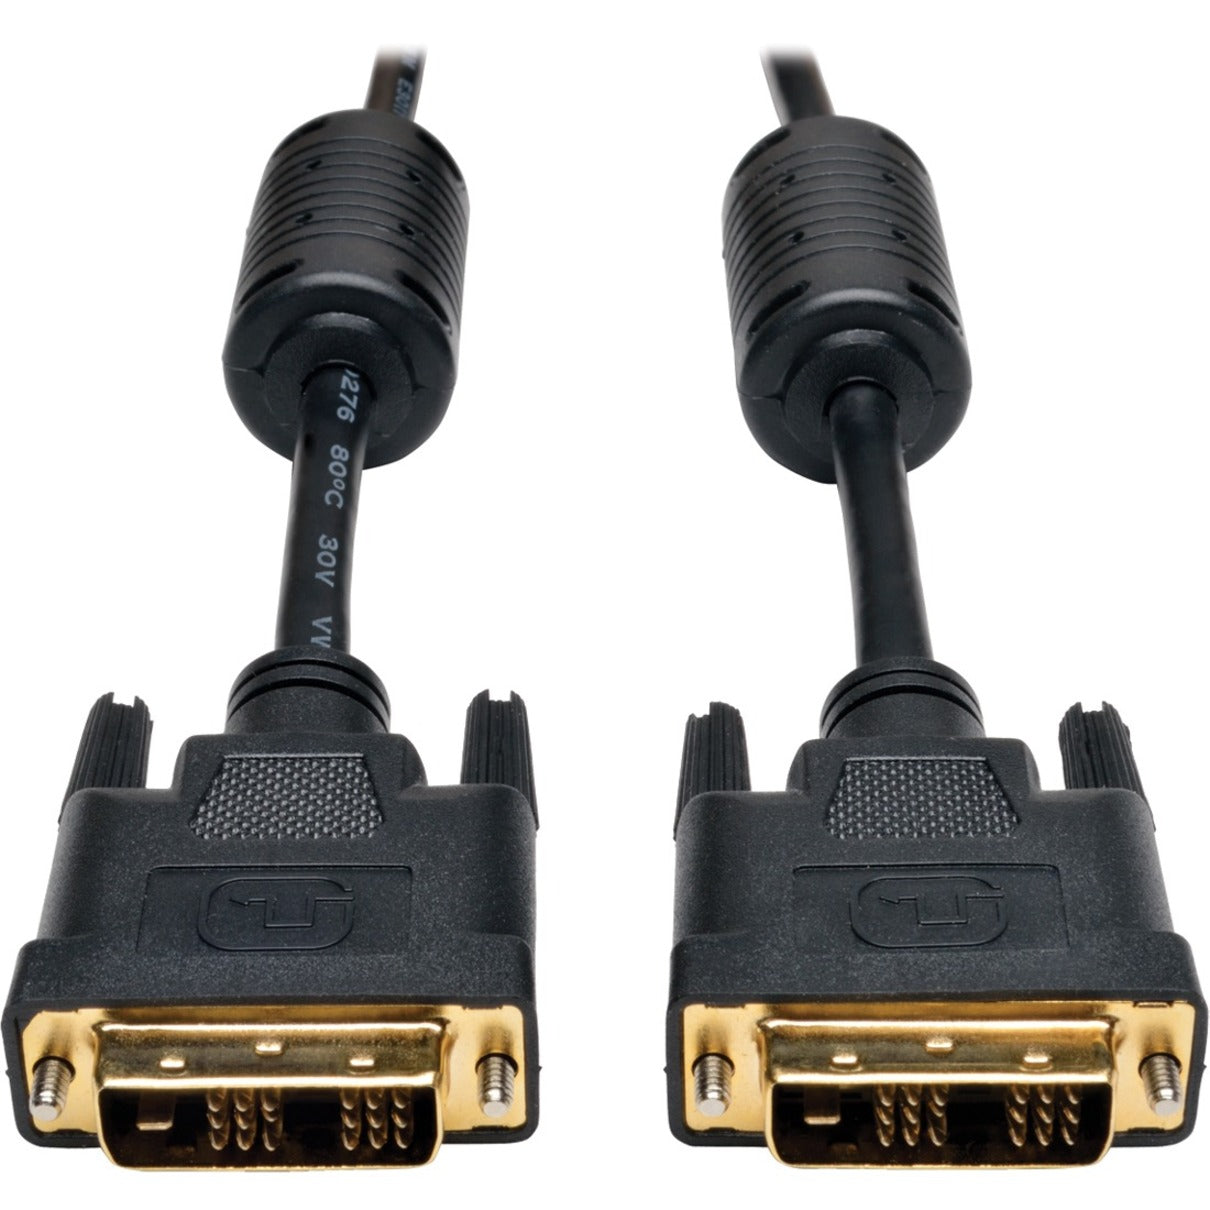 Tripp Lite P561-015 15-ft. DVI Single Link TMDS Cable, Molded, Copper Conductor, Gold Plated Connectors, Shielded, Black